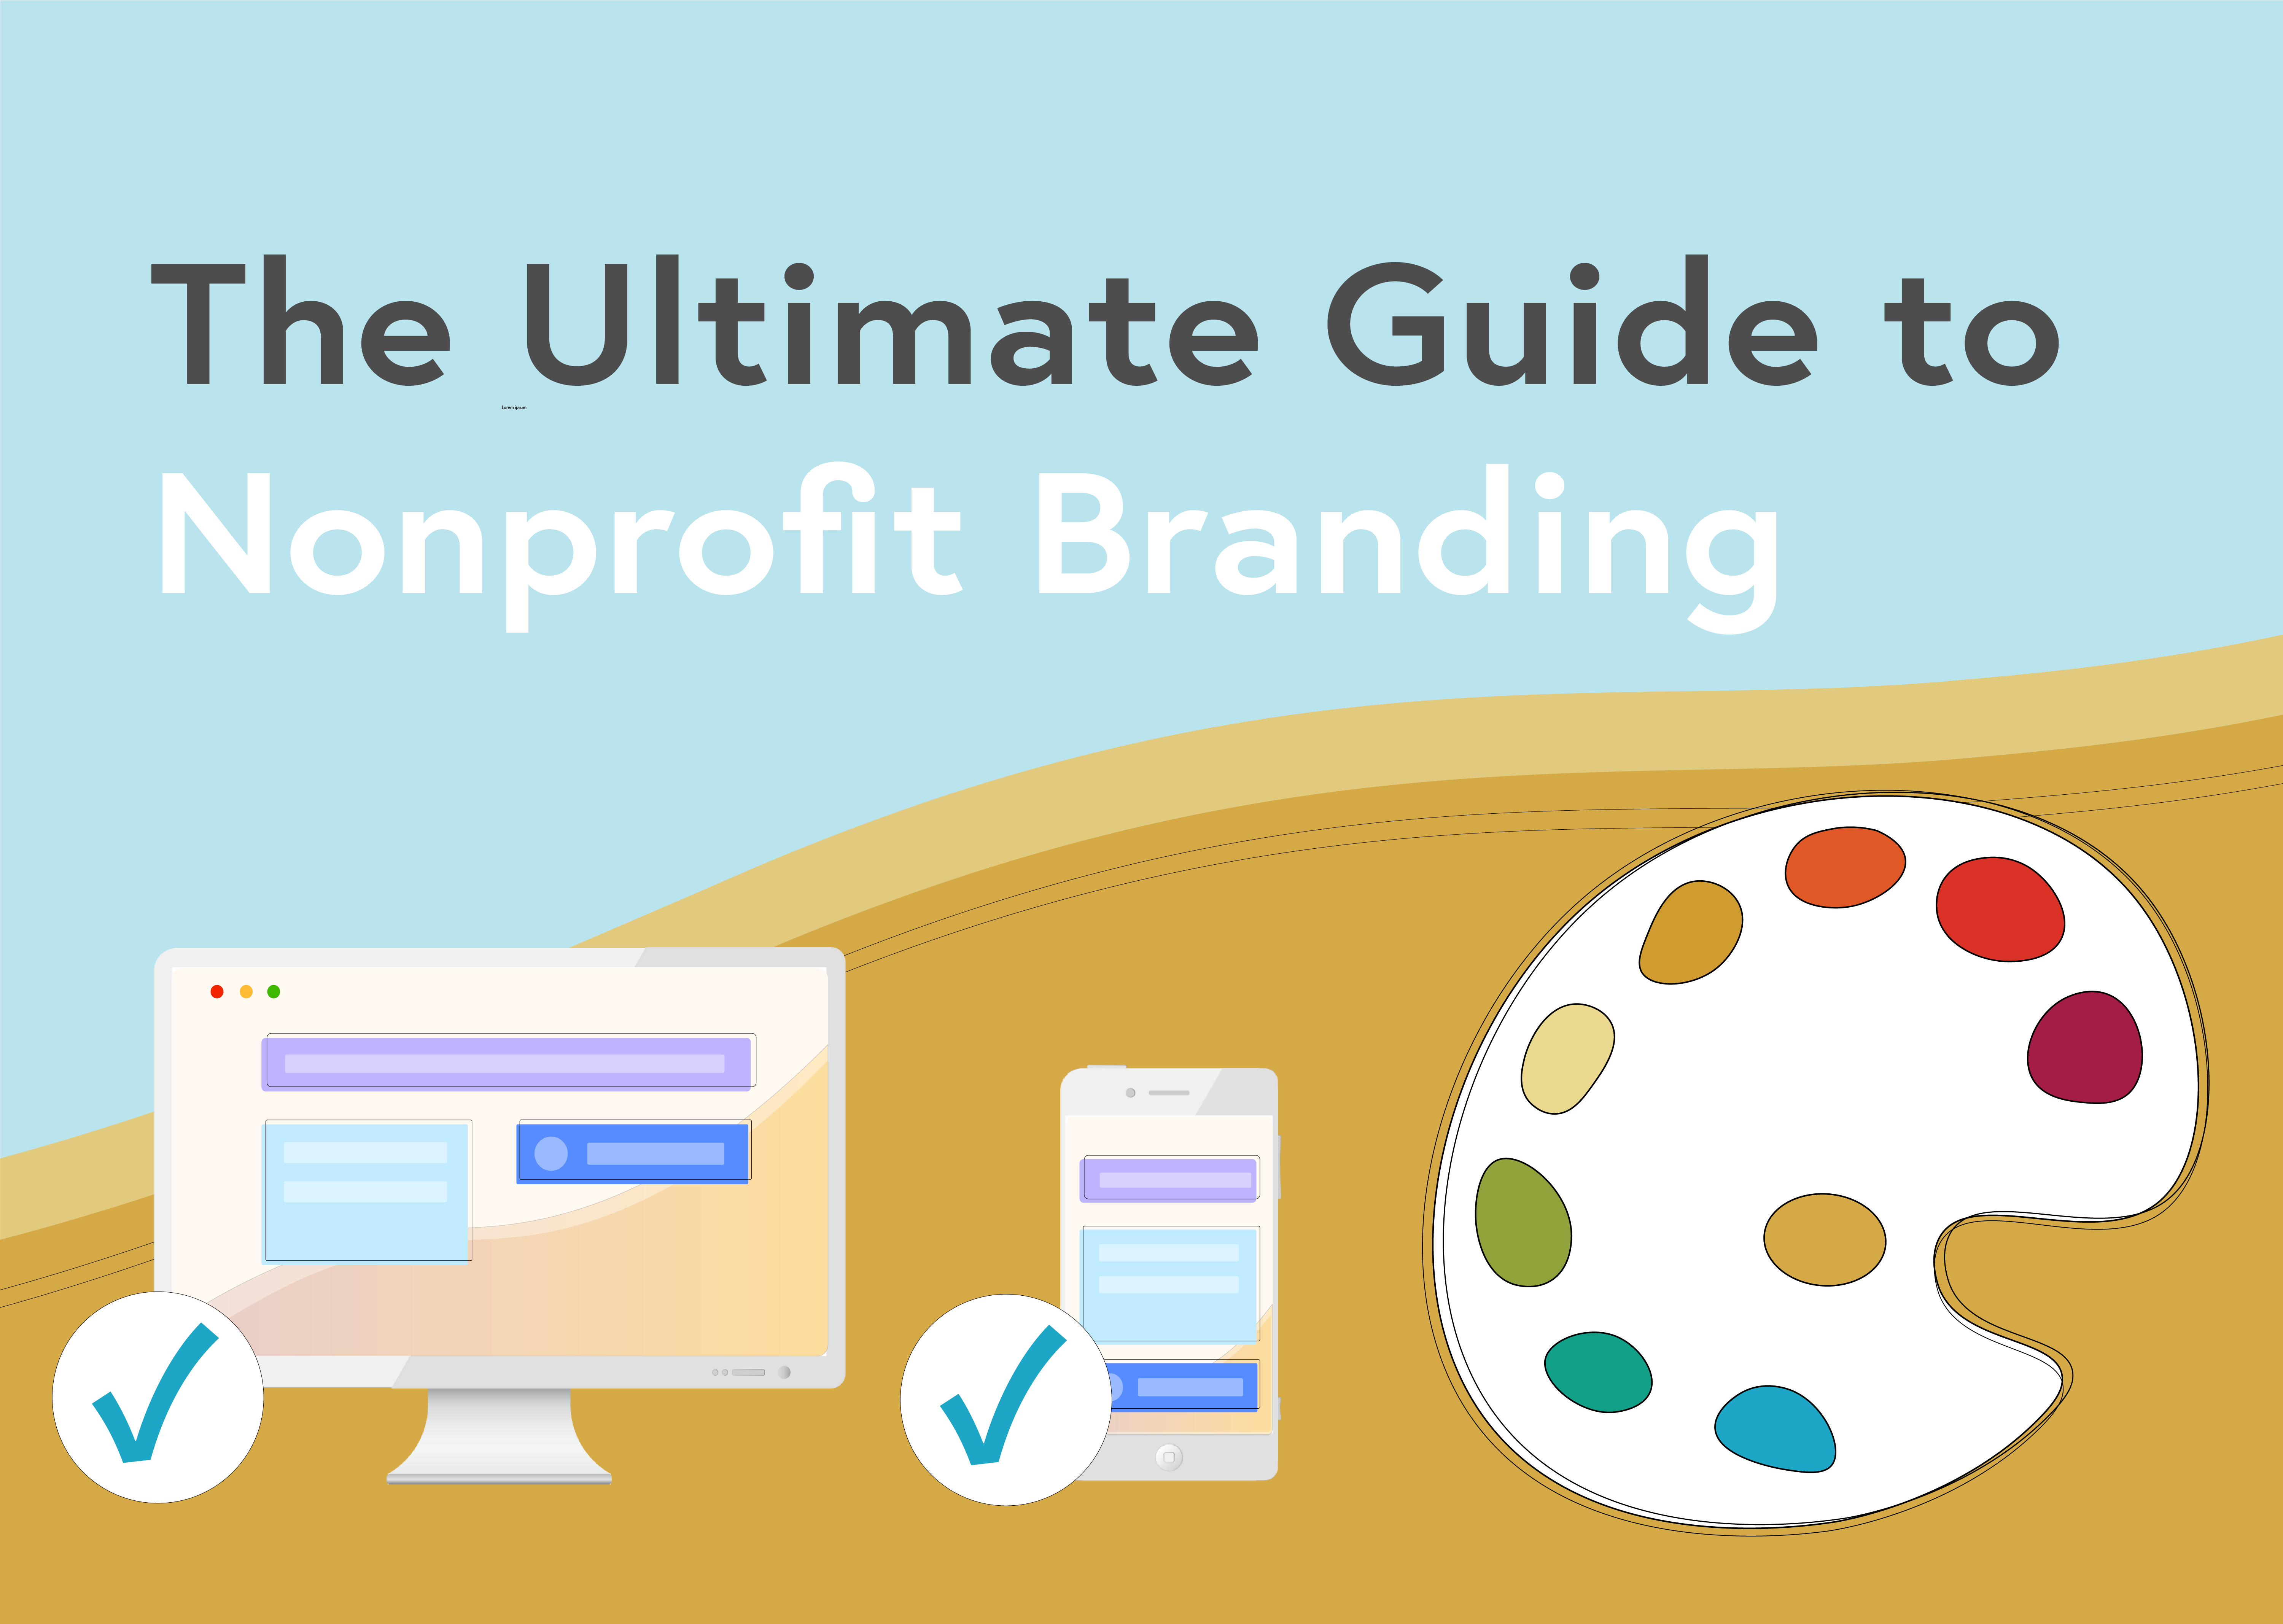 The Ultimate Guide to Nonprofit Branding